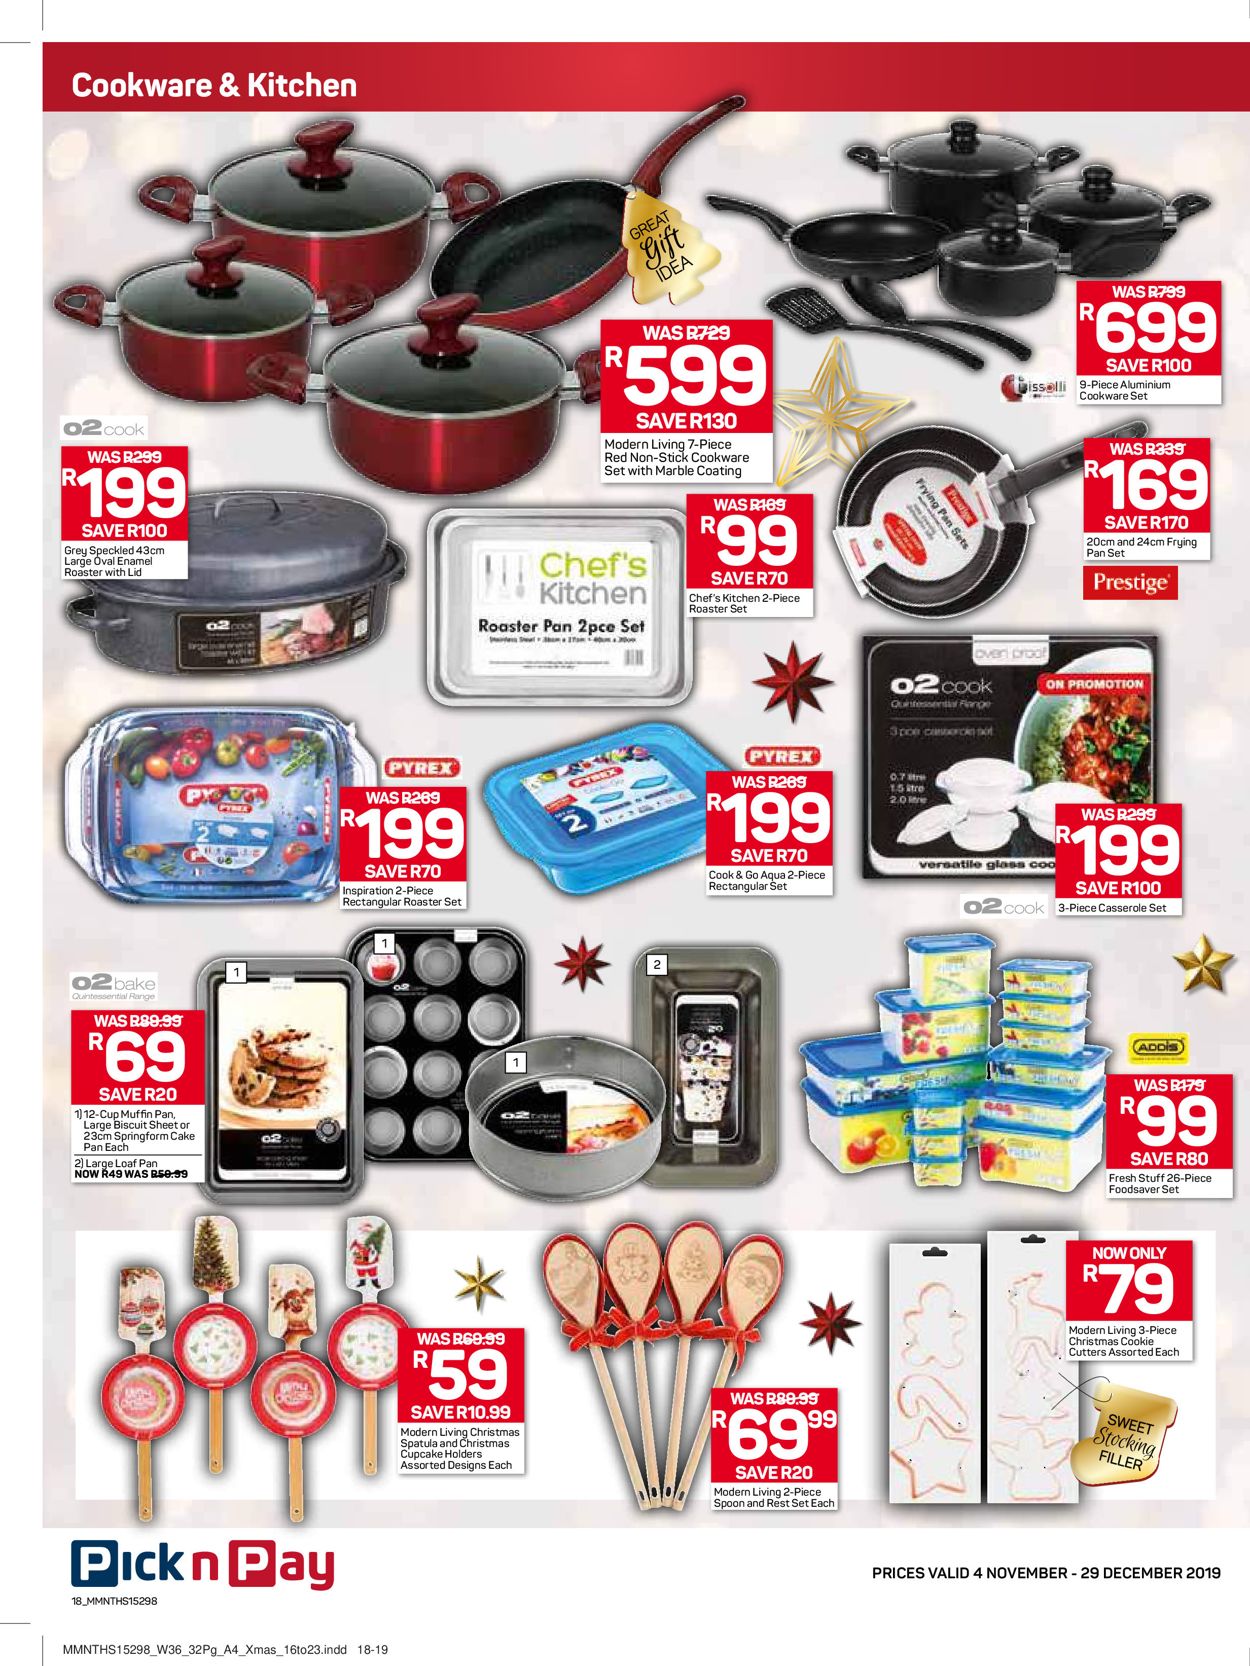 Pick n Pay Catalogue - 2019/11/04-2019/12/29 (Page 19)